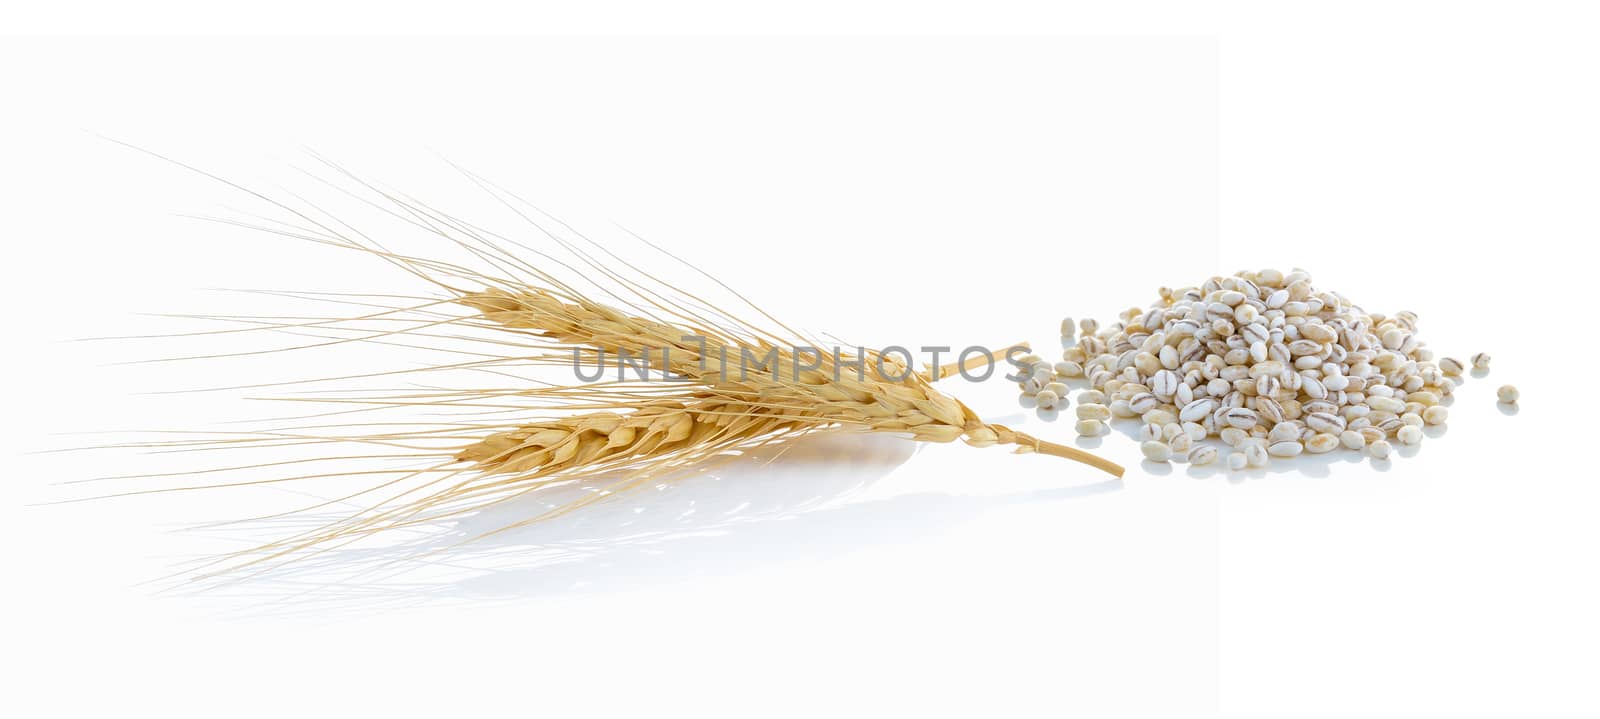  barley ear over a white background by sommai